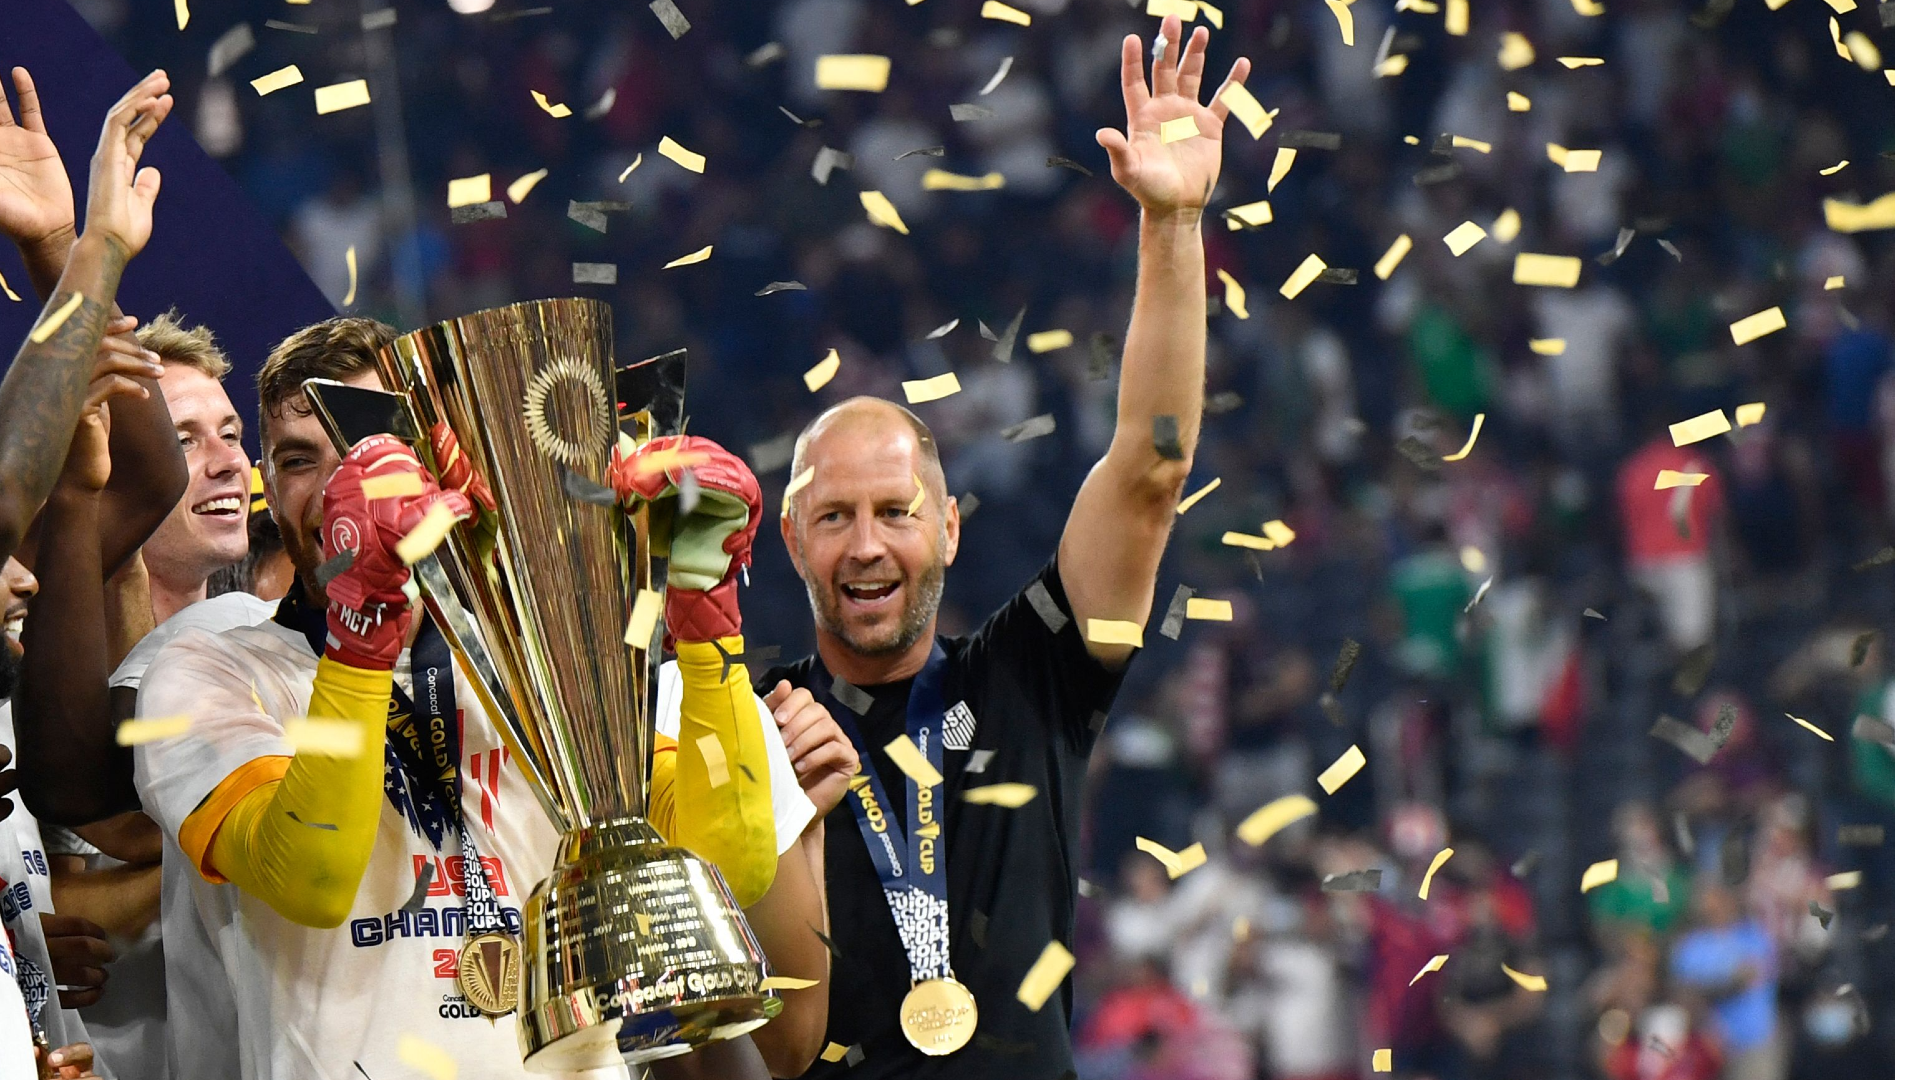 ‘I just wanted it so bad for them’ – Berhalter hails ‘relentless’ USMNT after incredible win over Mexico